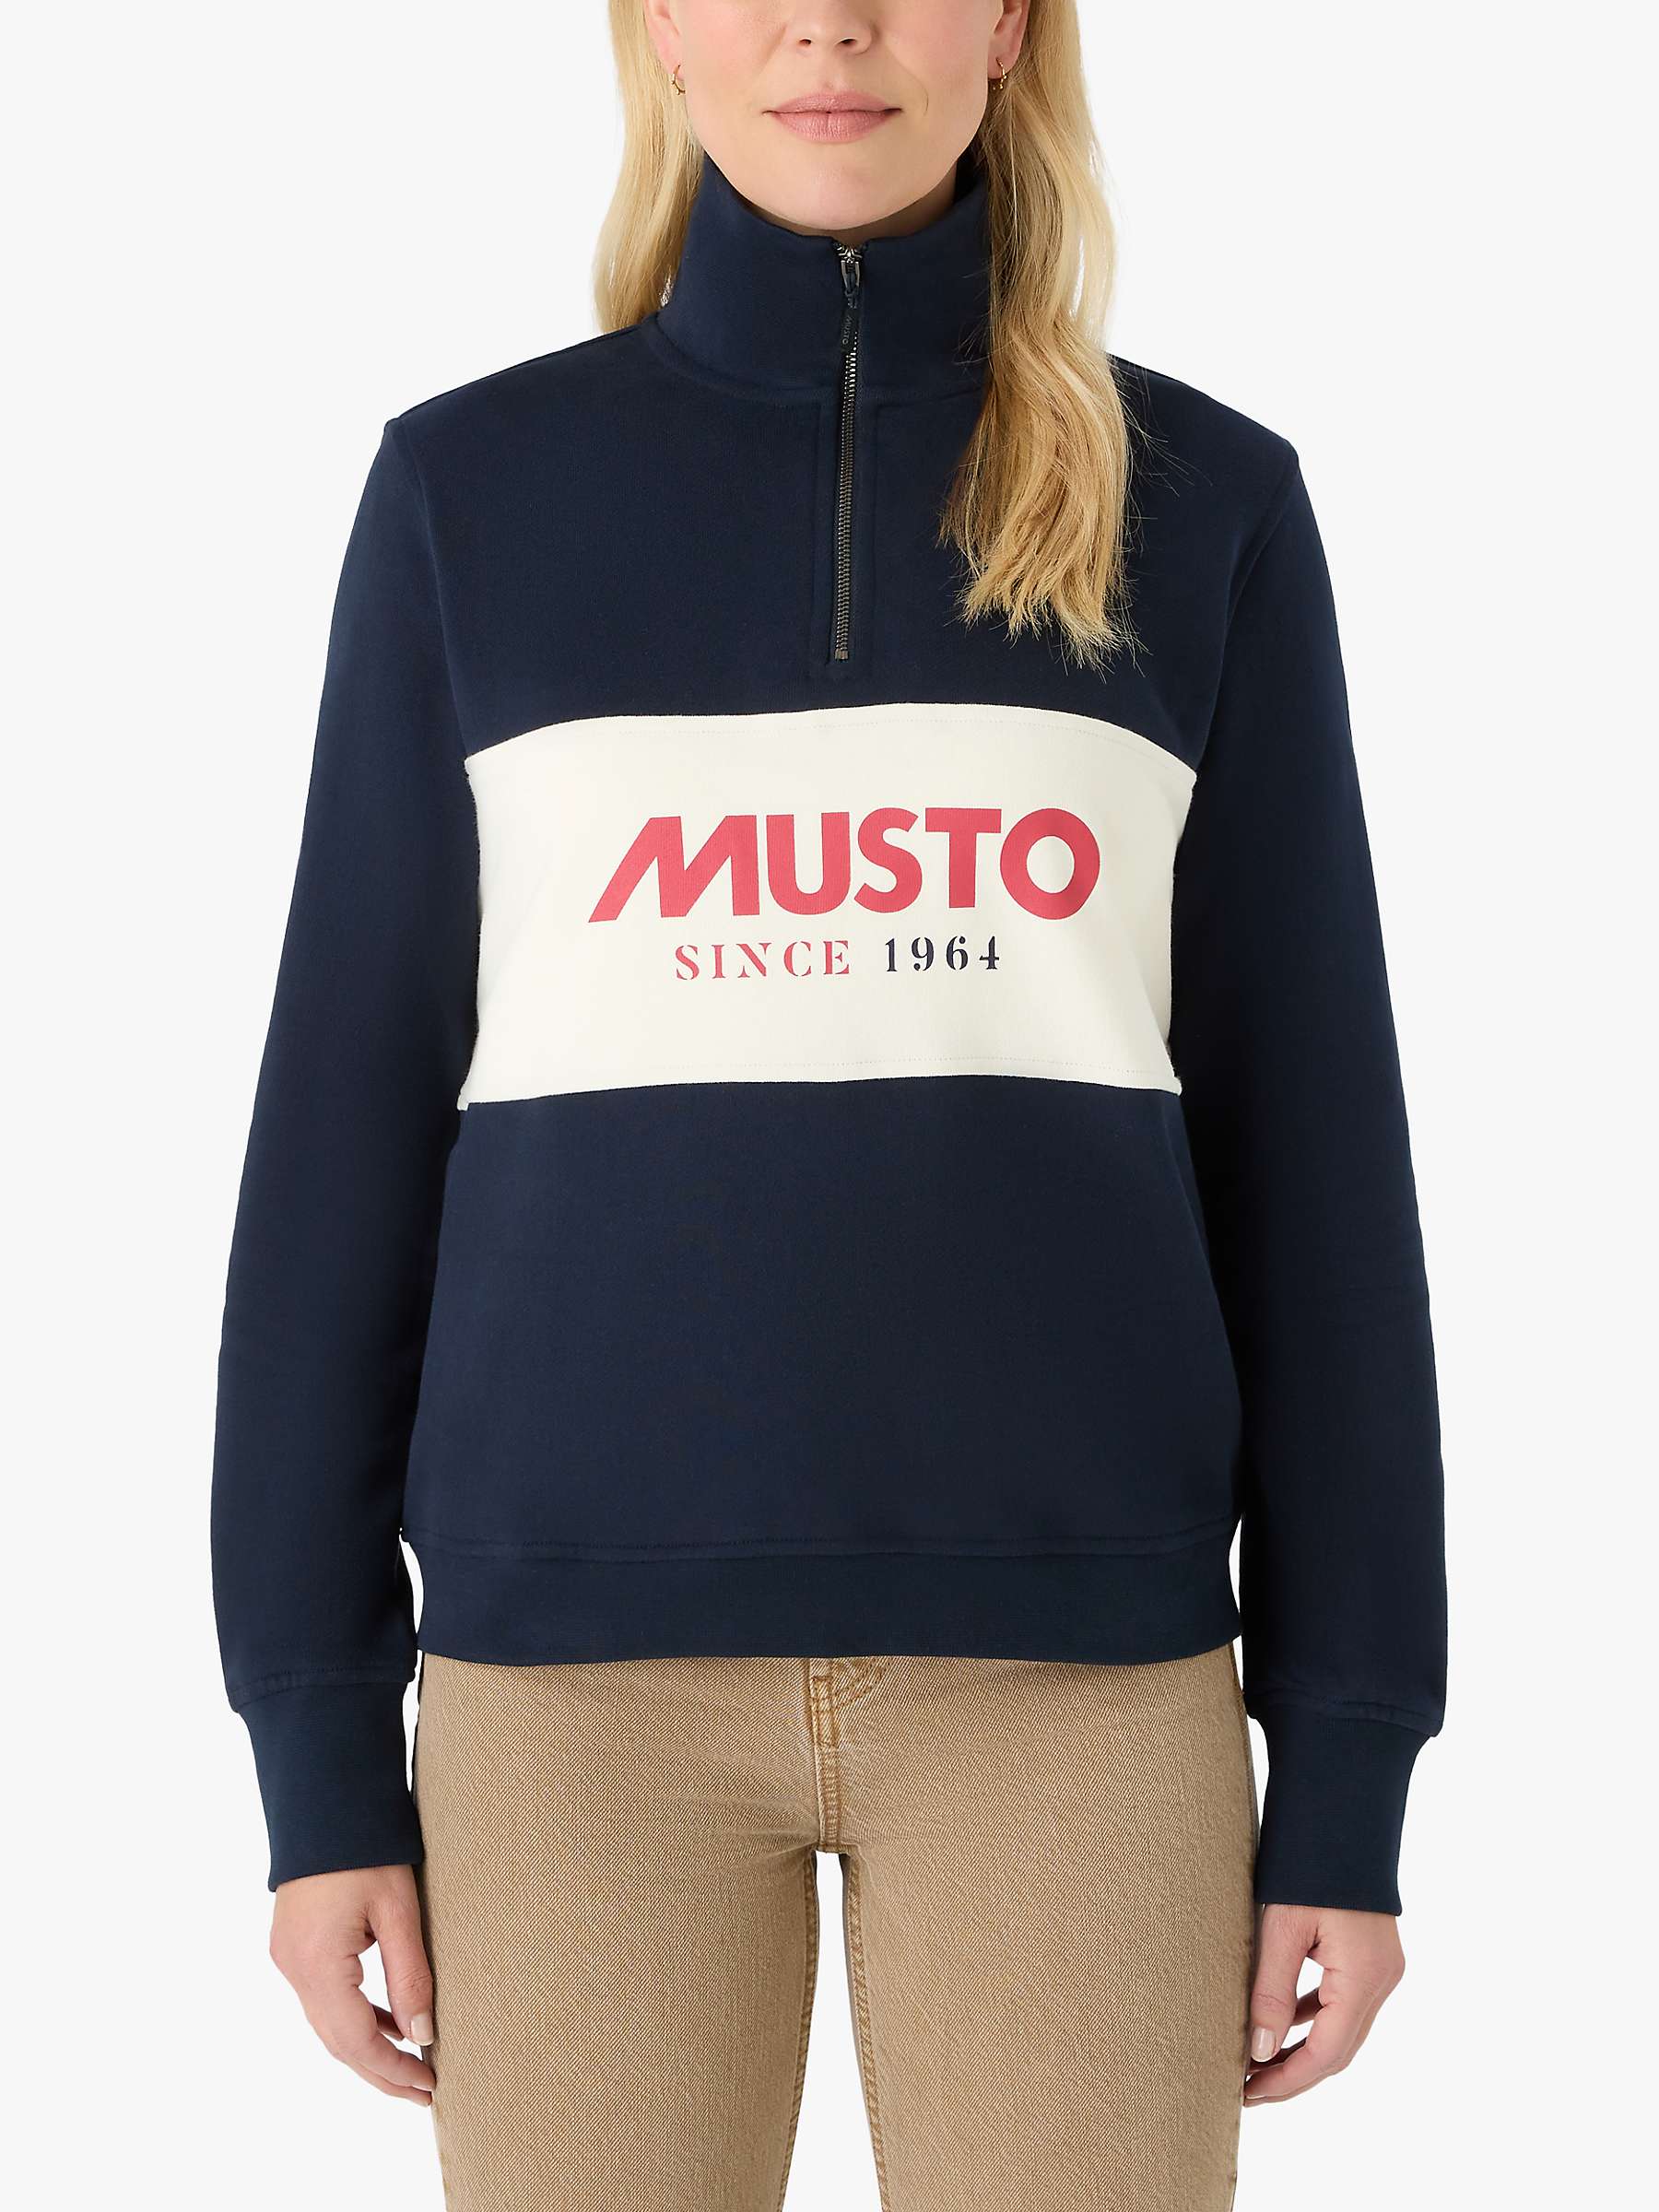 Buy Musto Relaxed Fit 1/4 Zip Jumper, Navy Online at johnlewis.com